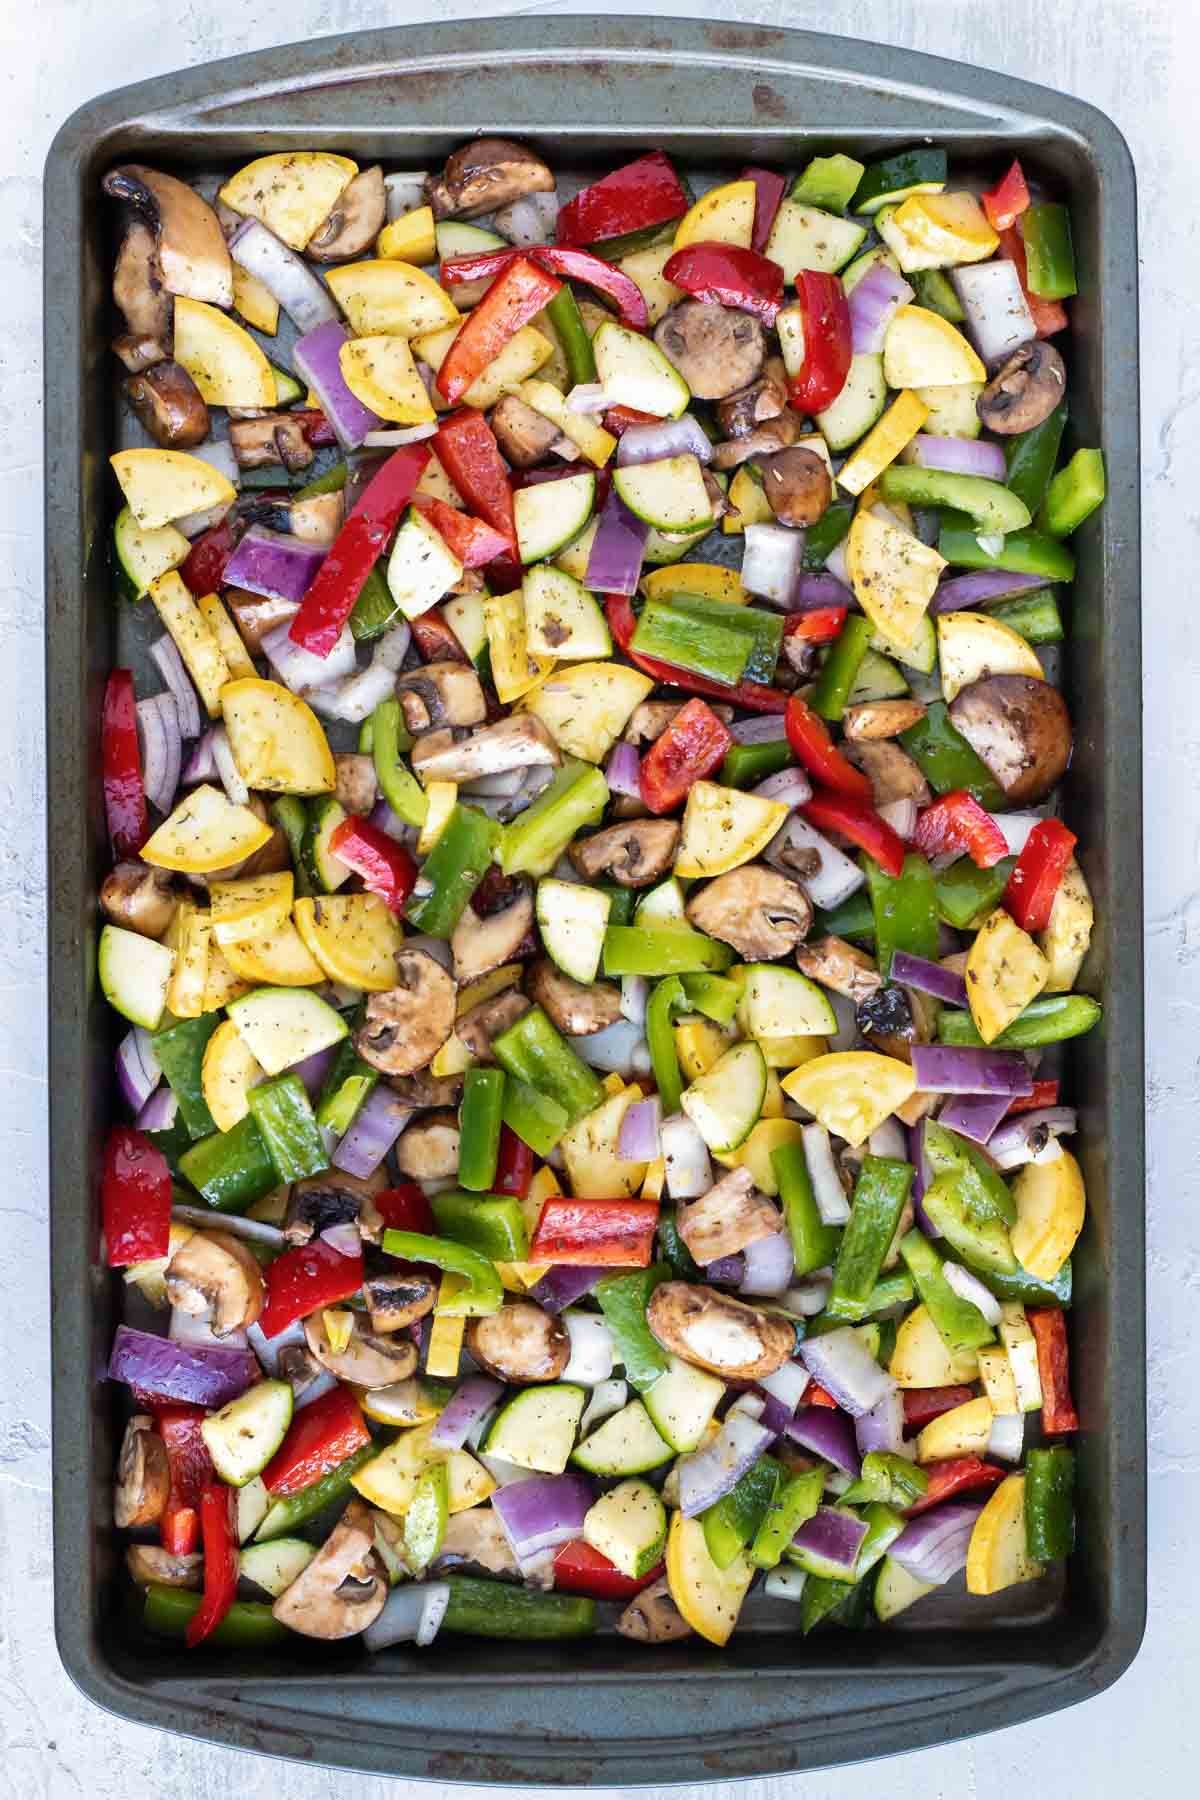 Raw veggies are spread on a baking sheet.